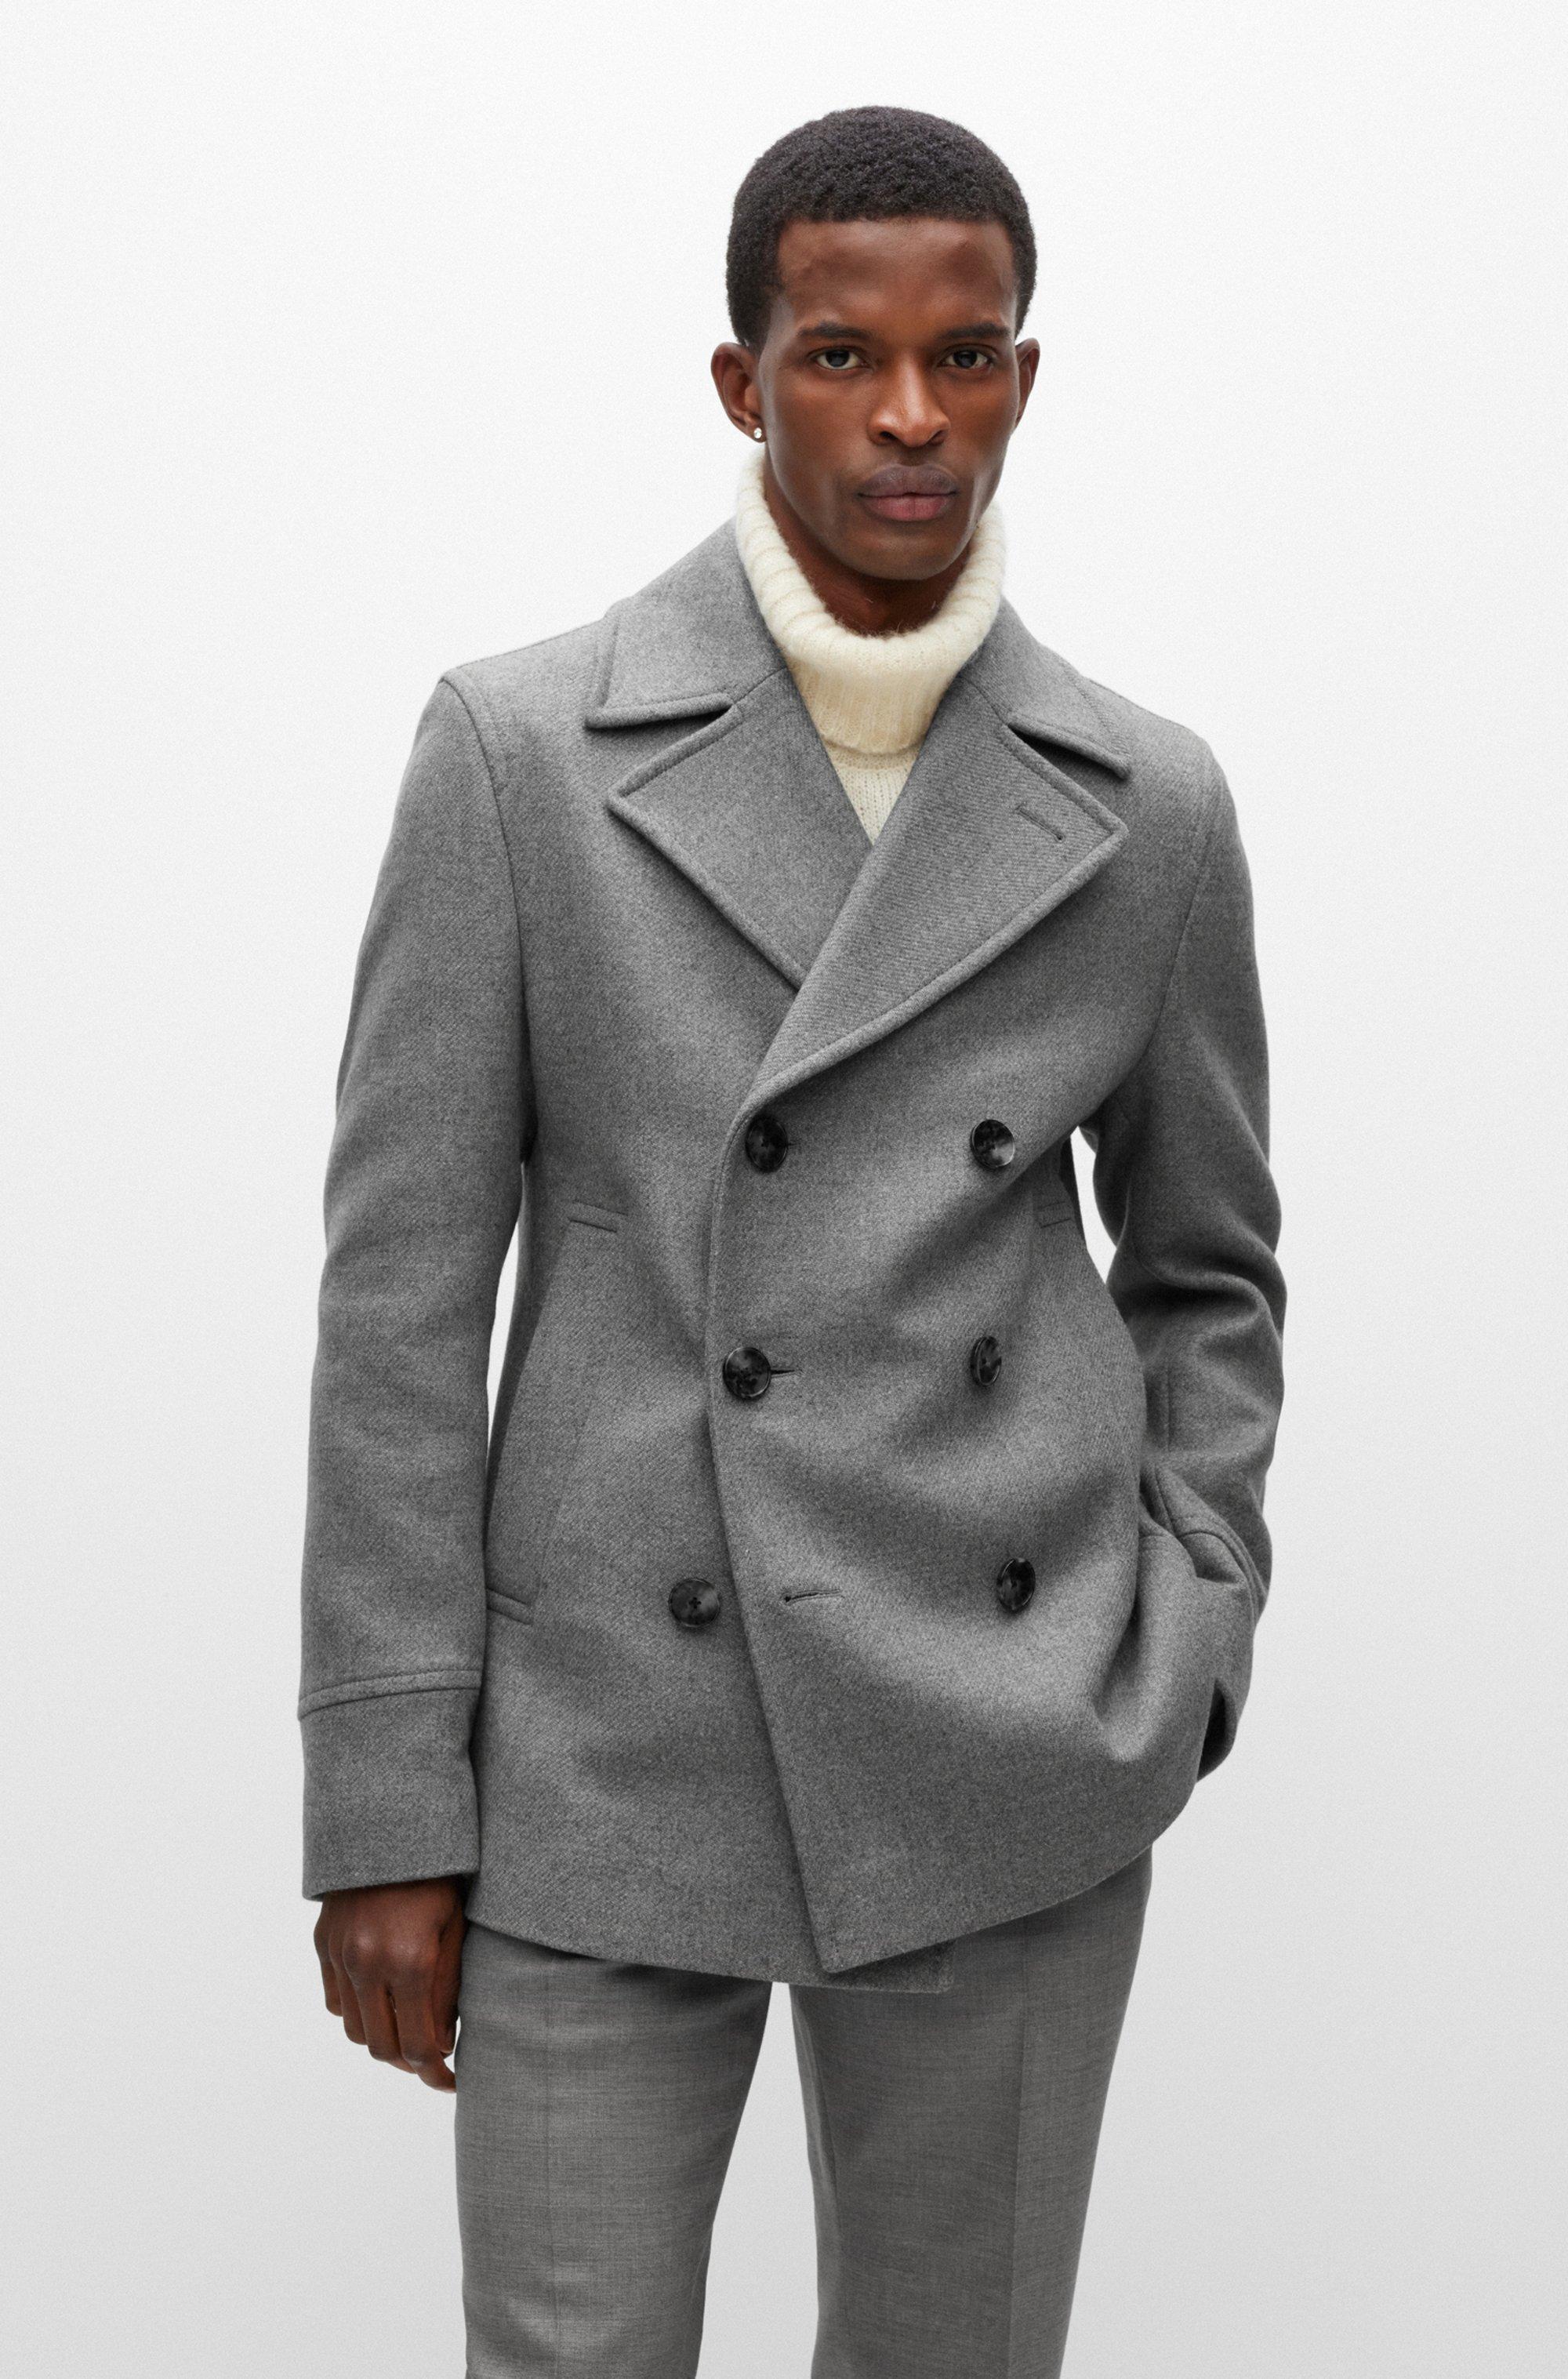 BOSS by HUGO BOSS Wool-blend Slim-fit Coat With Double-breasted Closure in  Gray for Men | Lyst